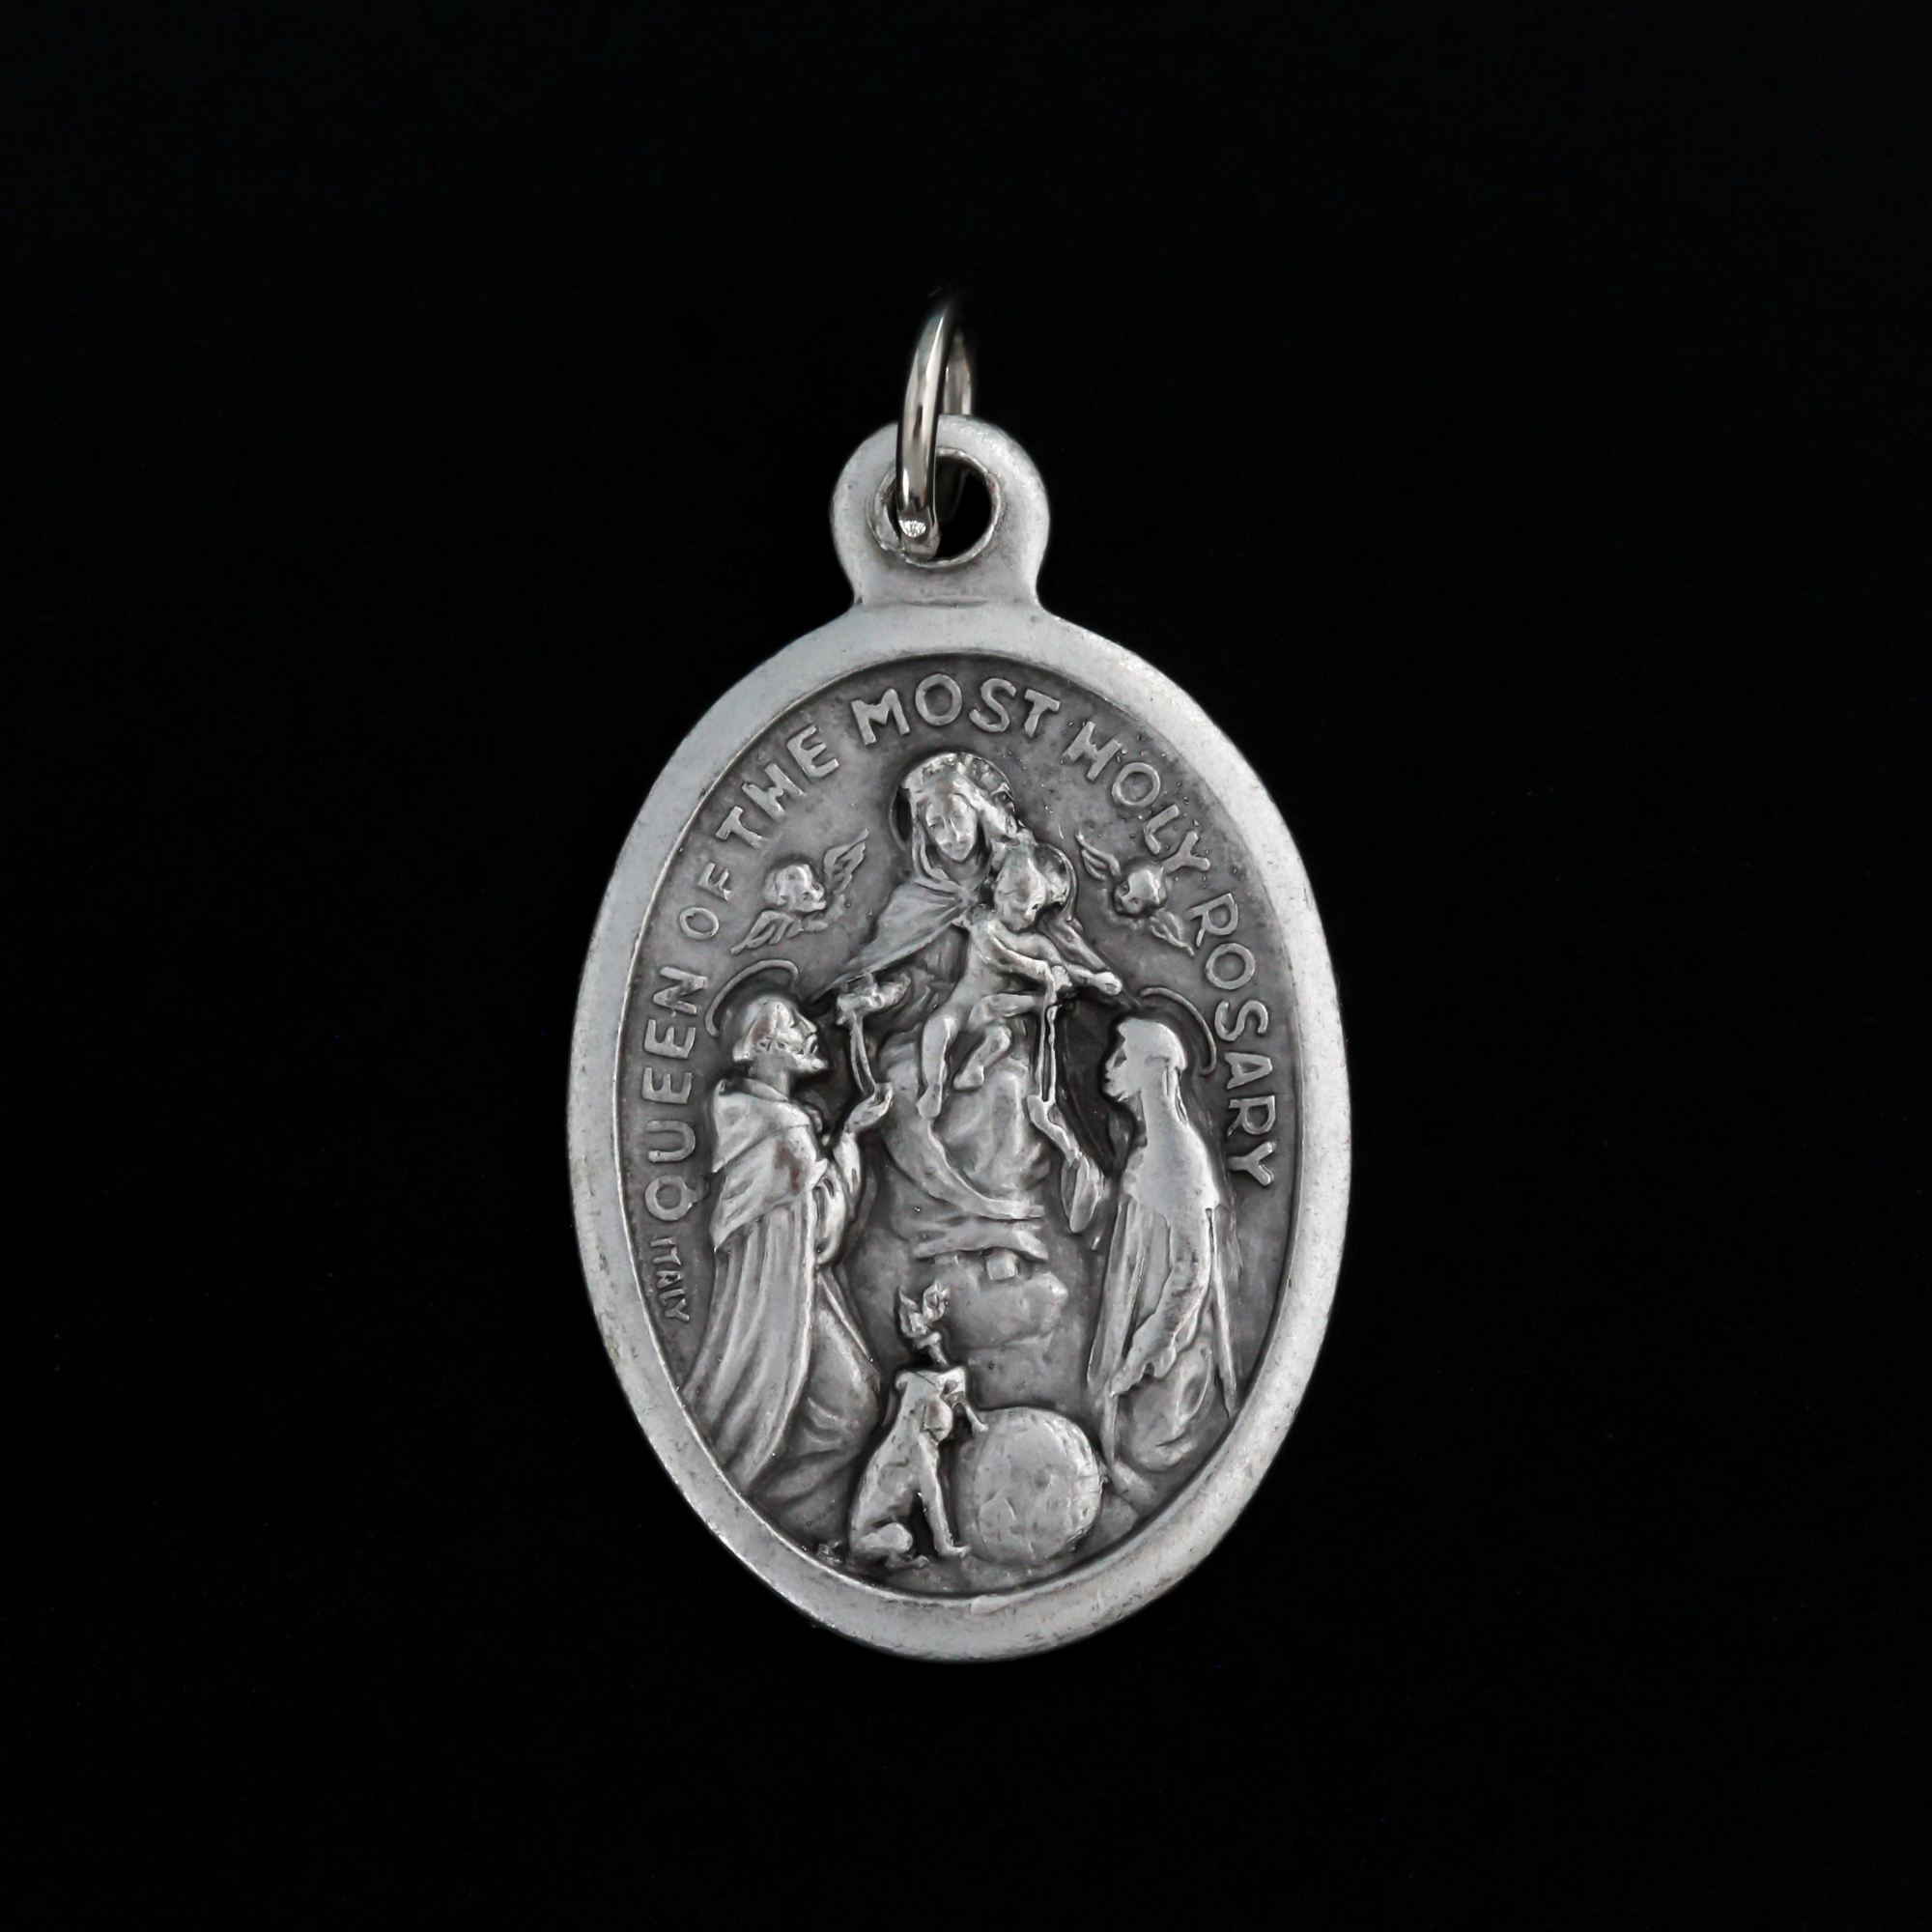 Our Lady of The Rosary Medal - Queen of the Most Holy Rosary